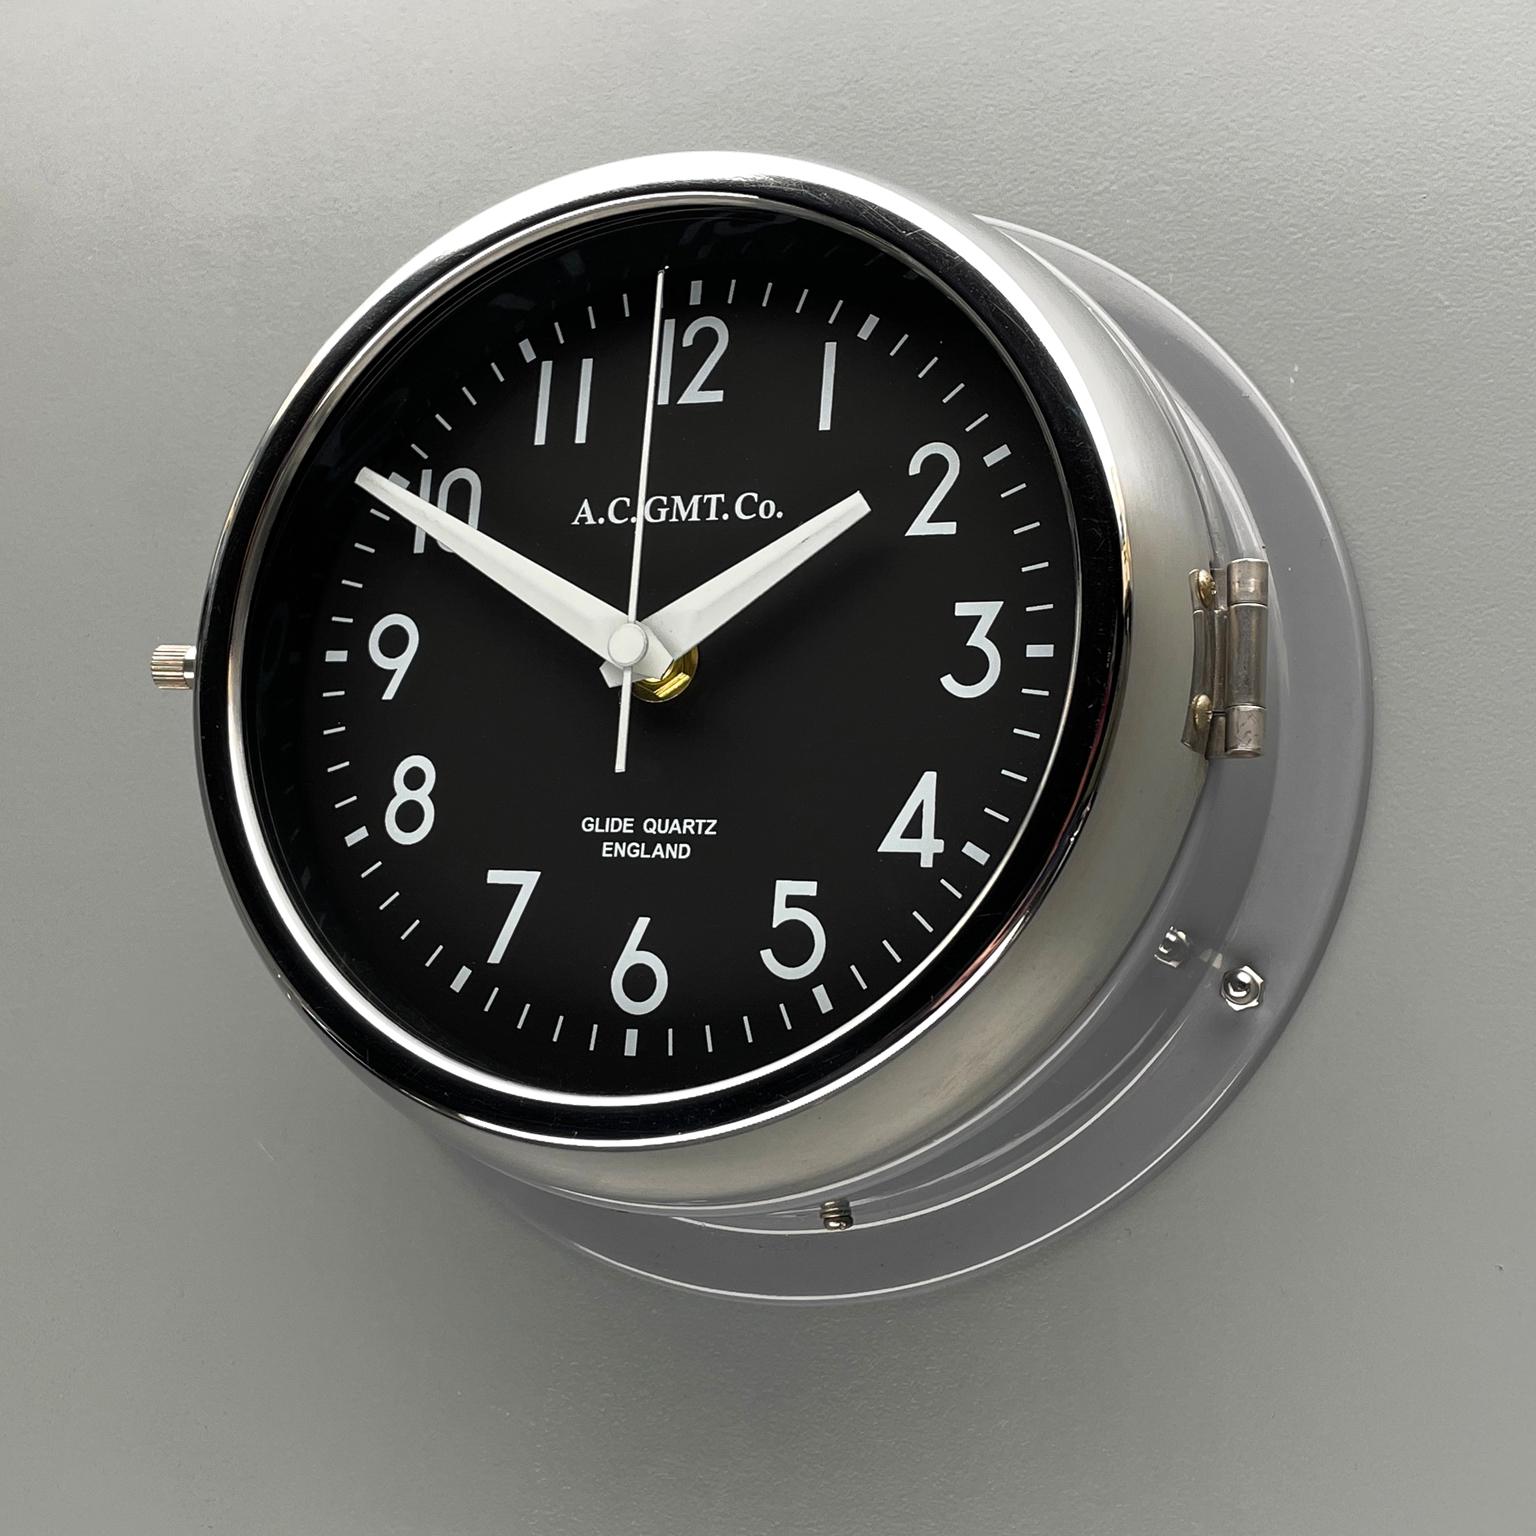 Quartz sweep seconds / non ticking wall clock finished in ultimate gray pantone 17-5104

Rescued from Industrial scrap yards and brought back to life in our UK workshop, our expert process allows us to create a high quality clock of luxury